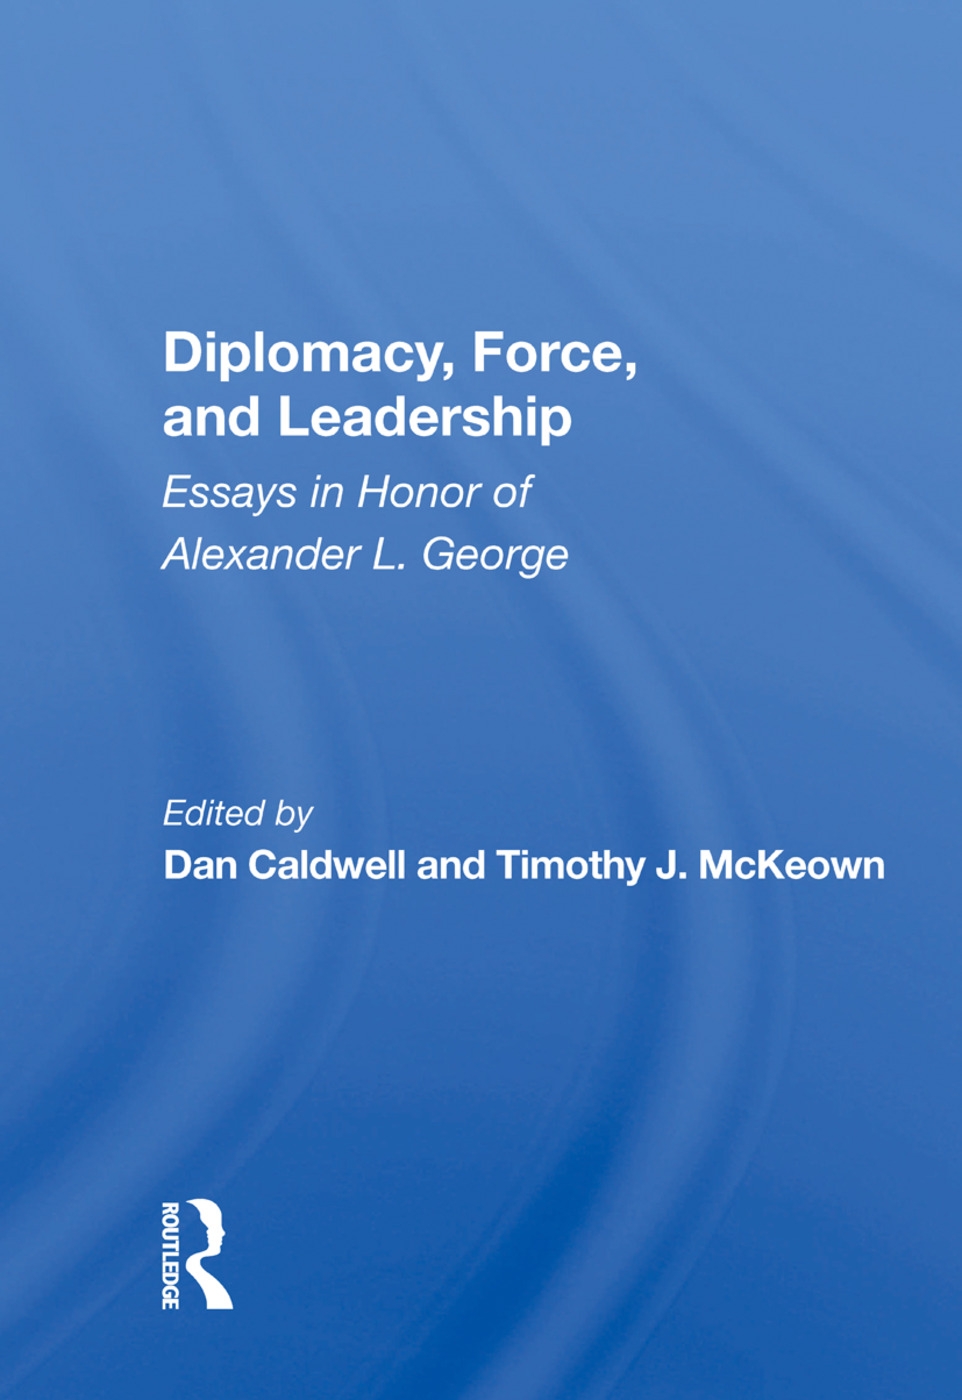 Diplomacy, Force, and Leadership: Essays in Honor of Alexander L. George